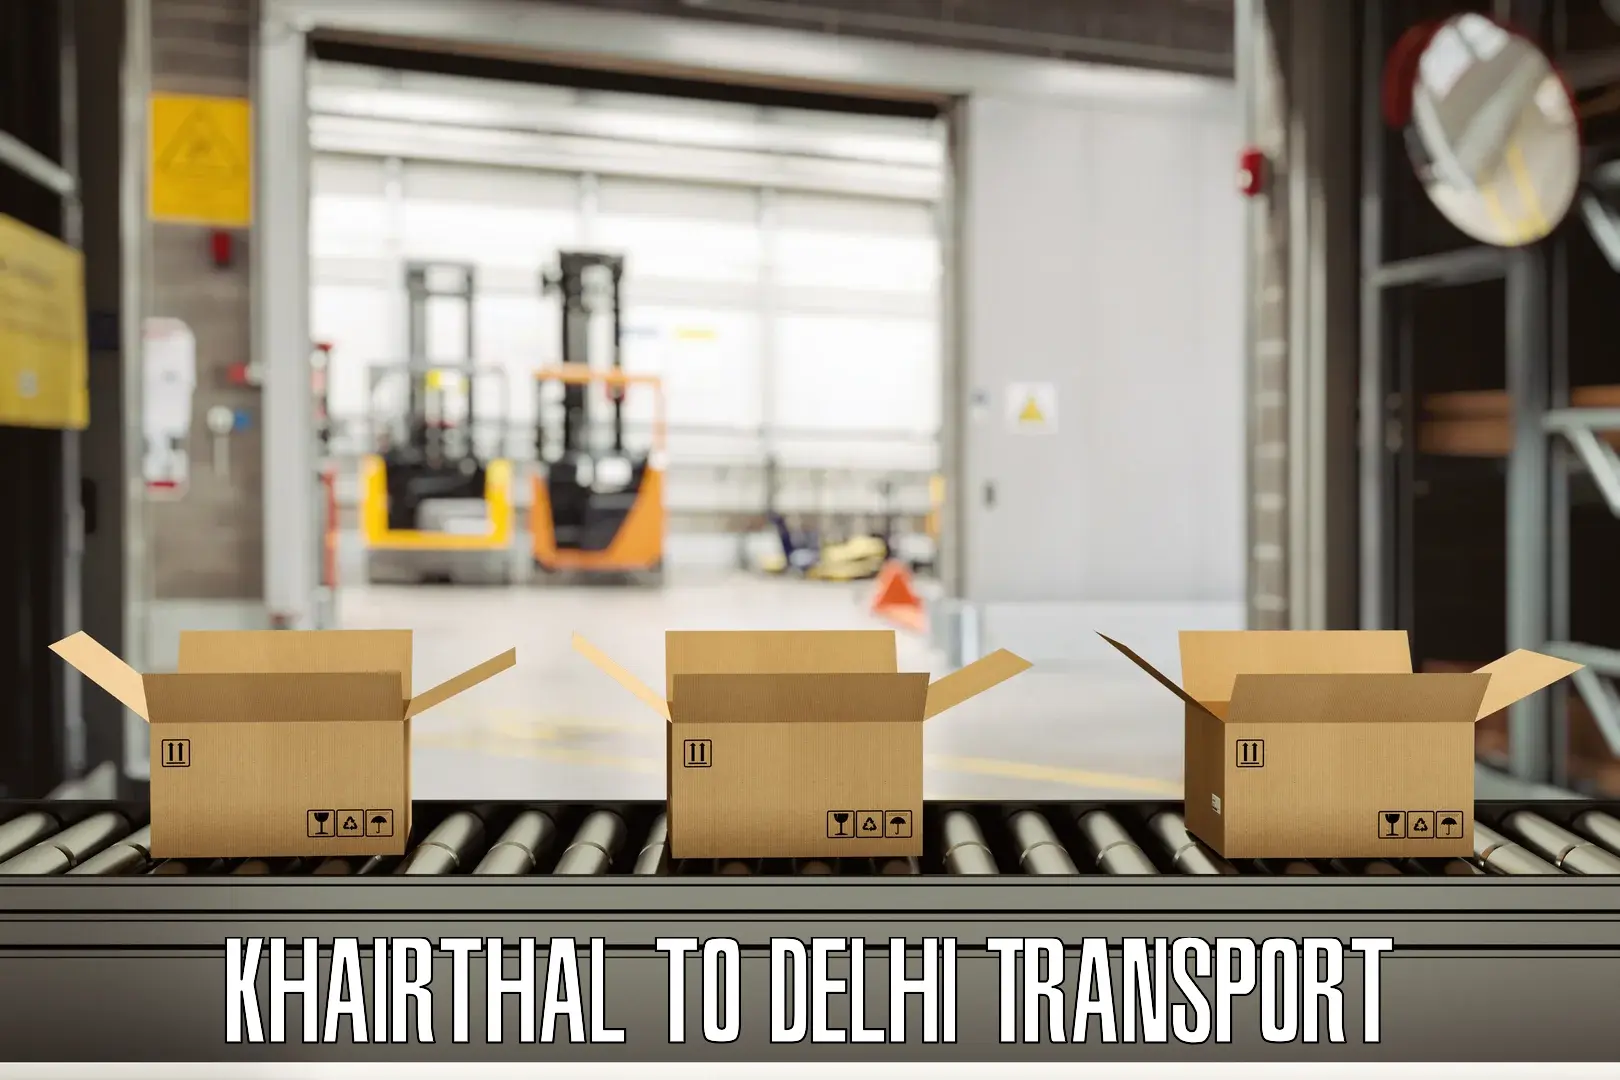 Transportation solution services Khairthal to Lodhi Road